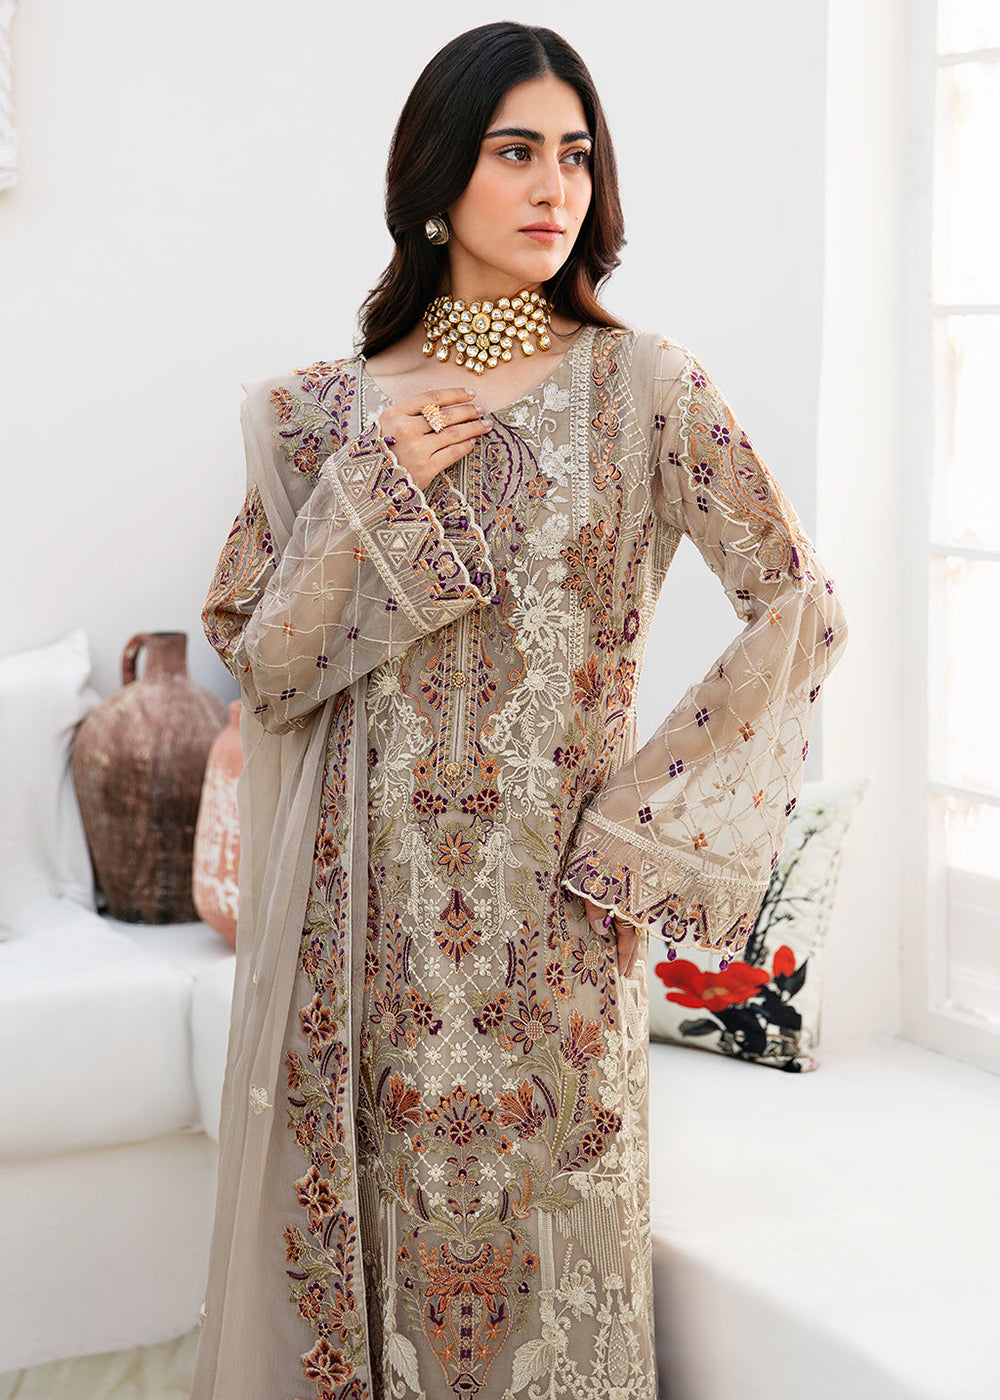 Buy Now Chevron Chiffon Collection Volume 8 by Ramsha | A-806 Online at Empress in USA, UK, Canada & Worldwide at Empress Clothing. 